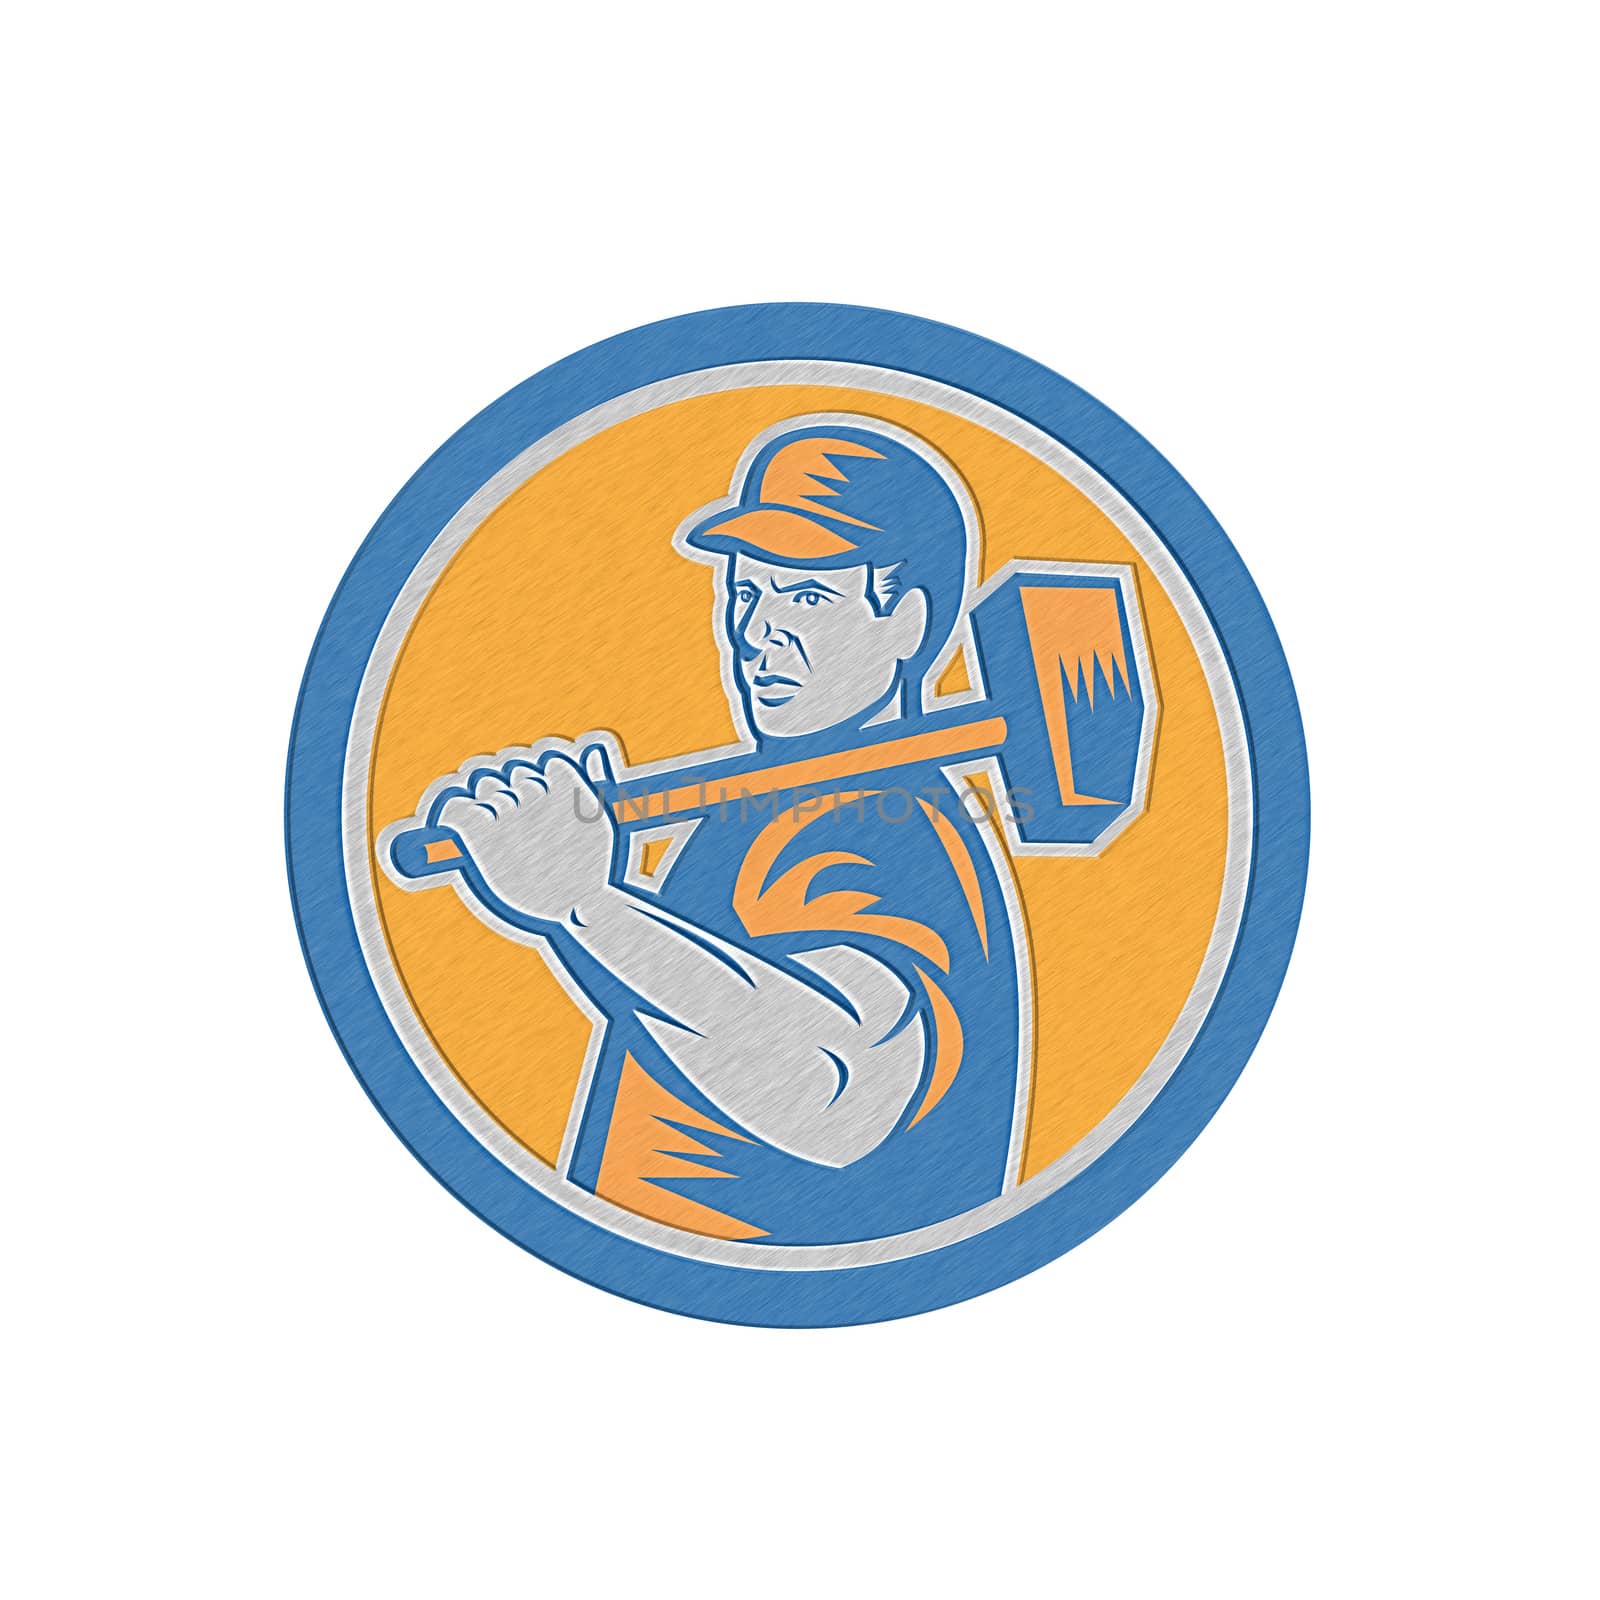 Metallic styled illustration of a union worker holding sledgehammer hammer over shoulder done in retro style set inside circle on isolated background.